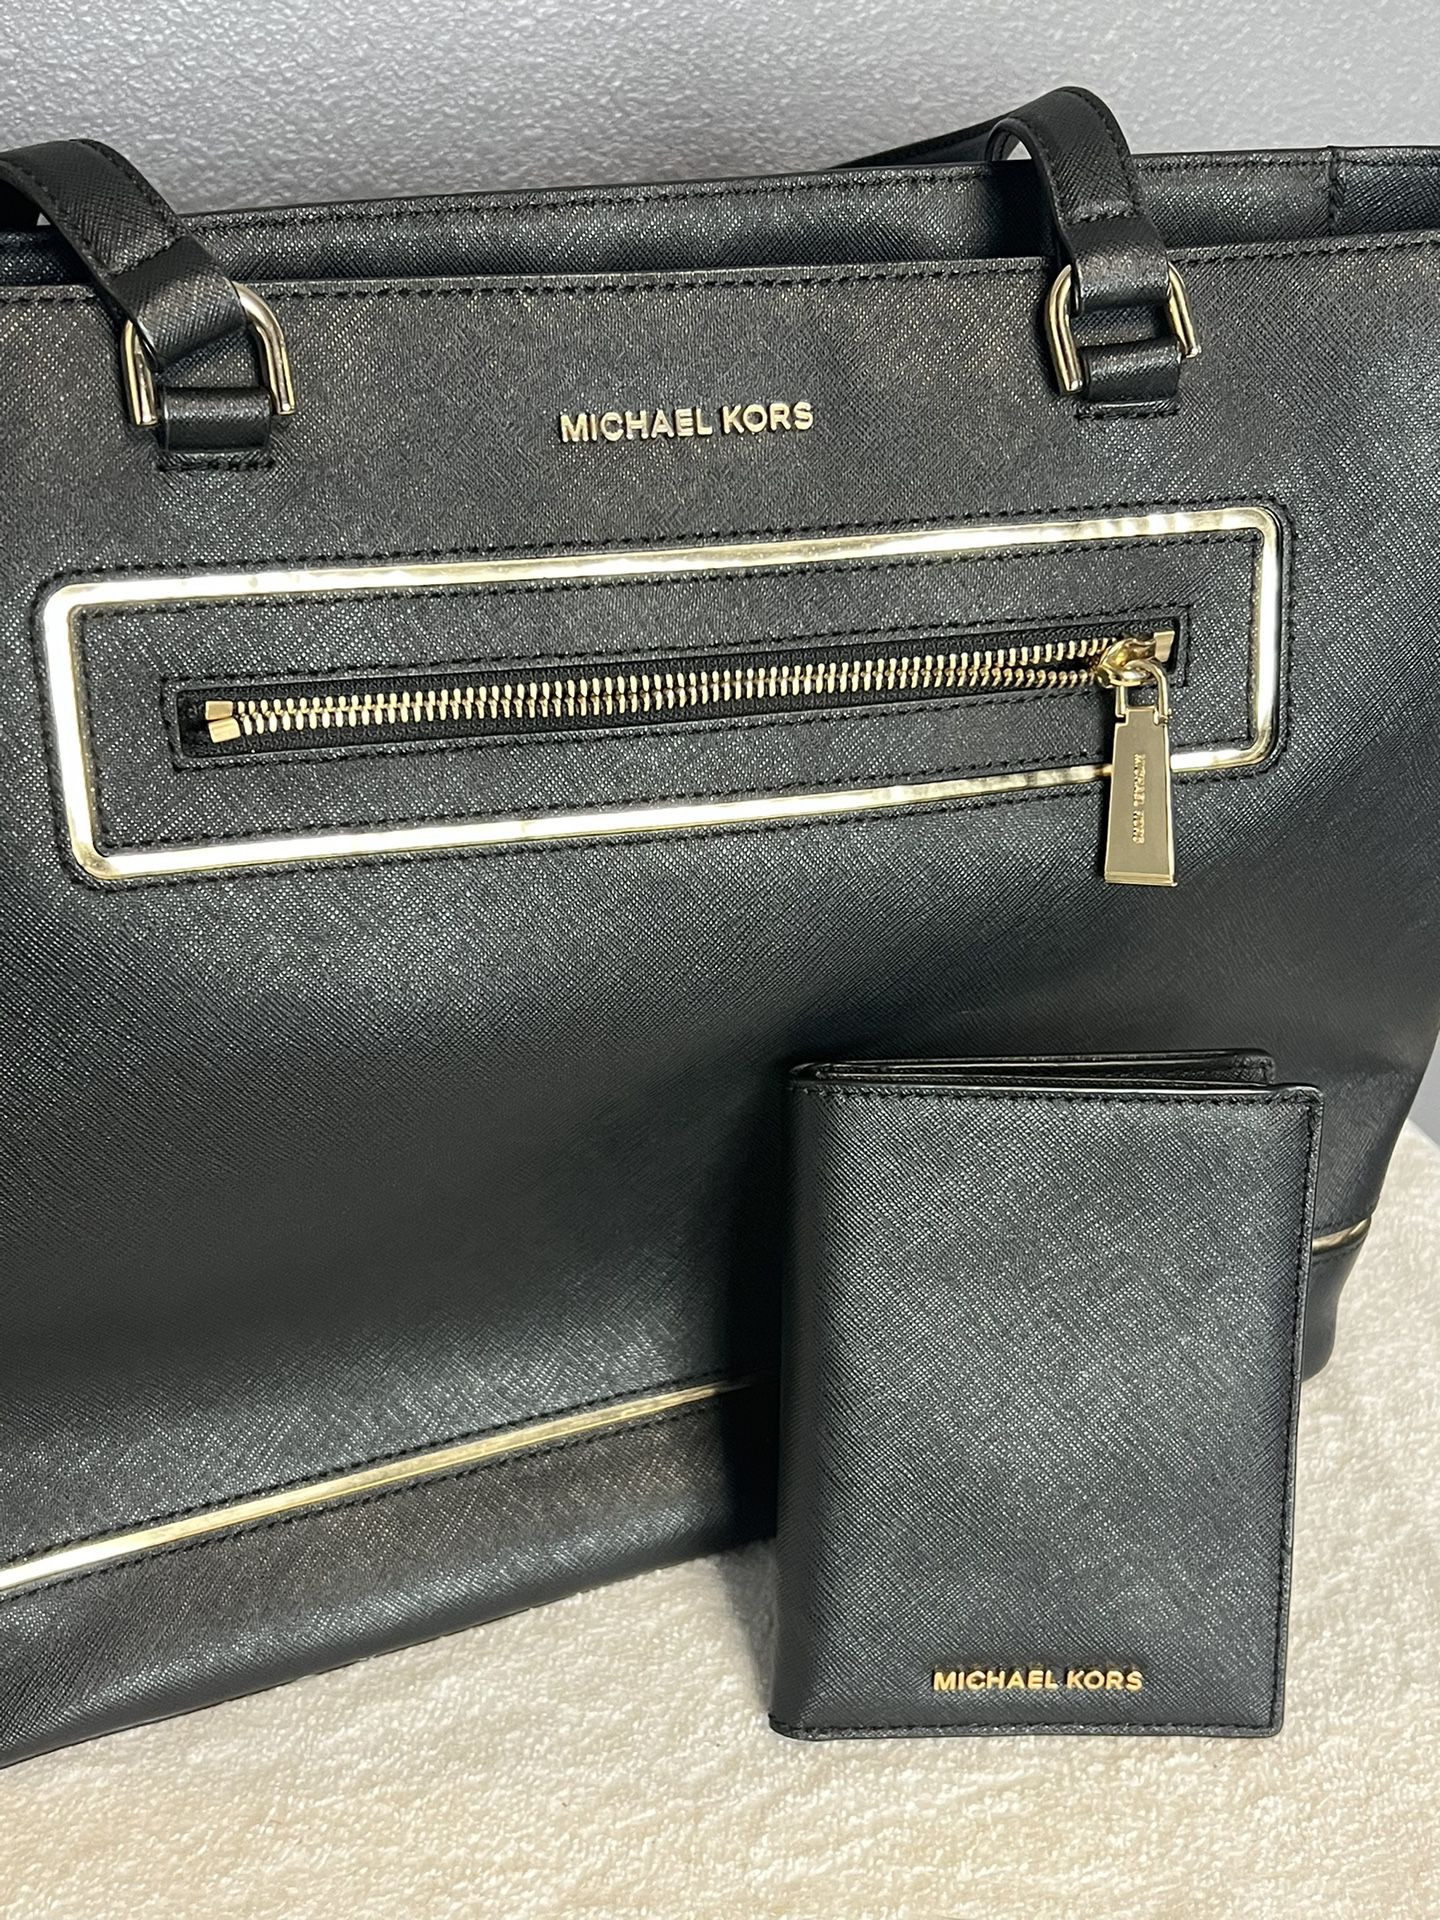 Michael Kors Jet Set Tote And Wallet